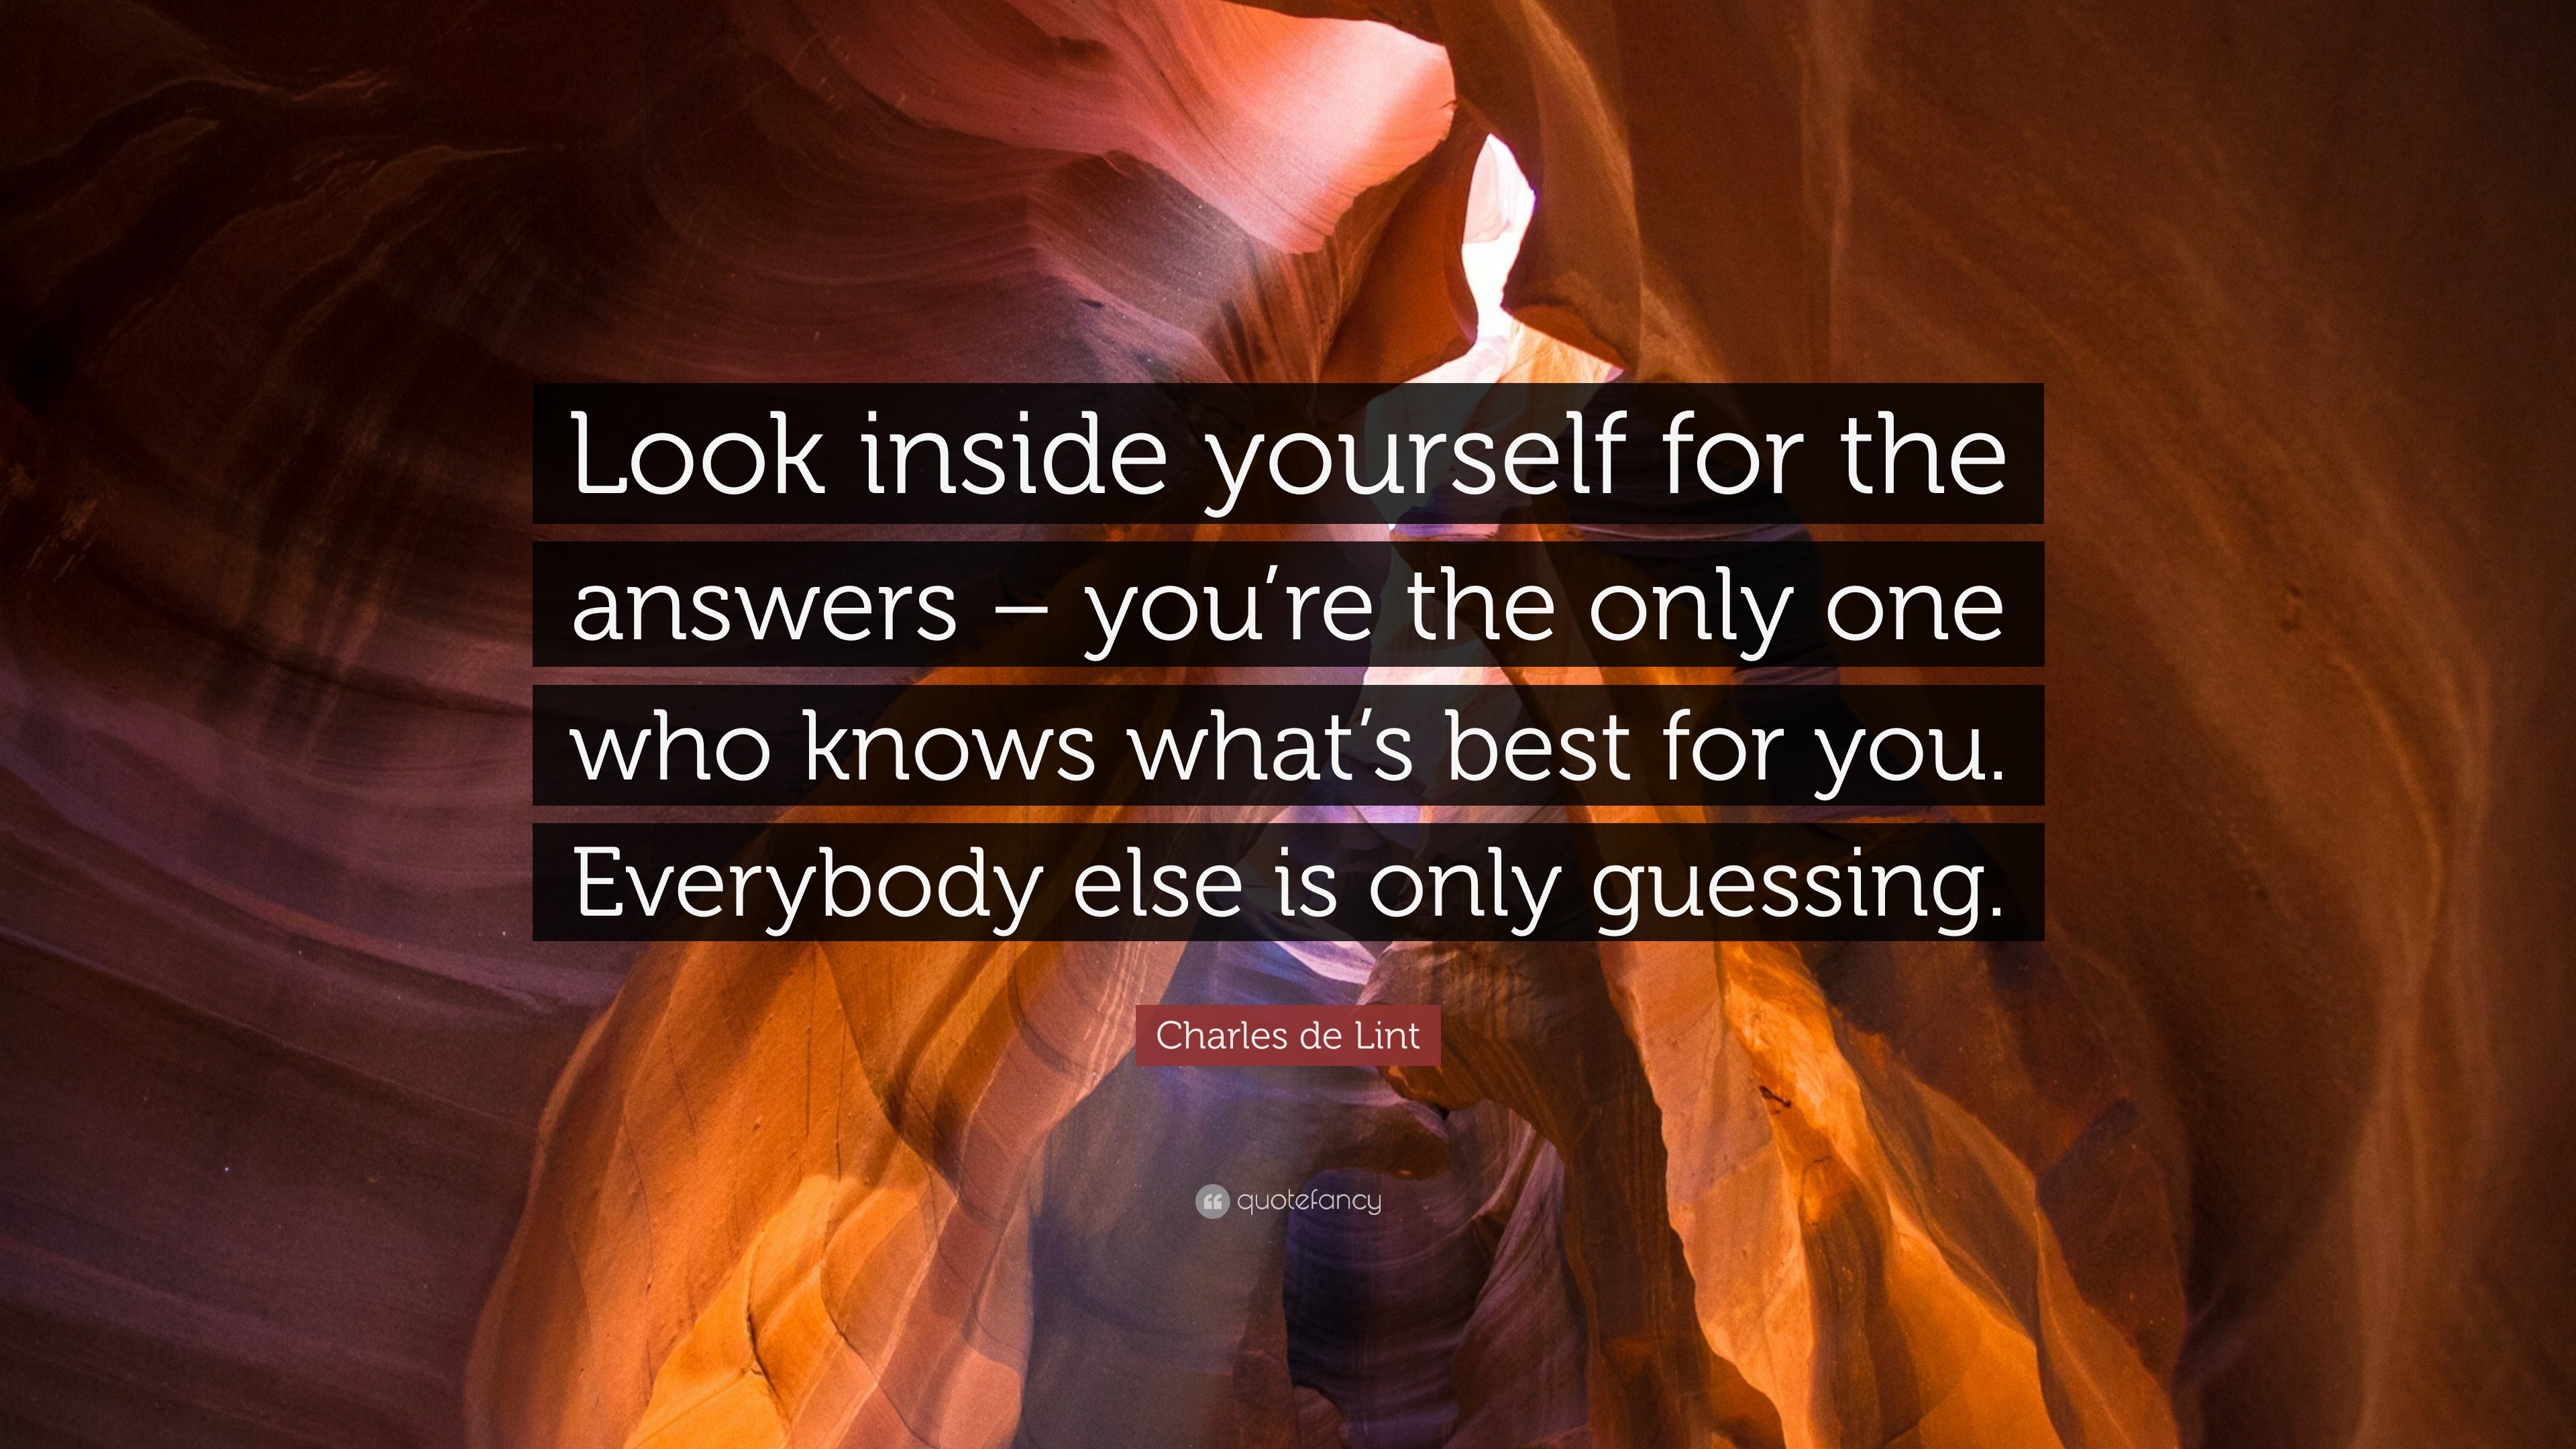 Charles De Lint Quote Look Inside Yourself For The Answers Youre The Only One Who Knows